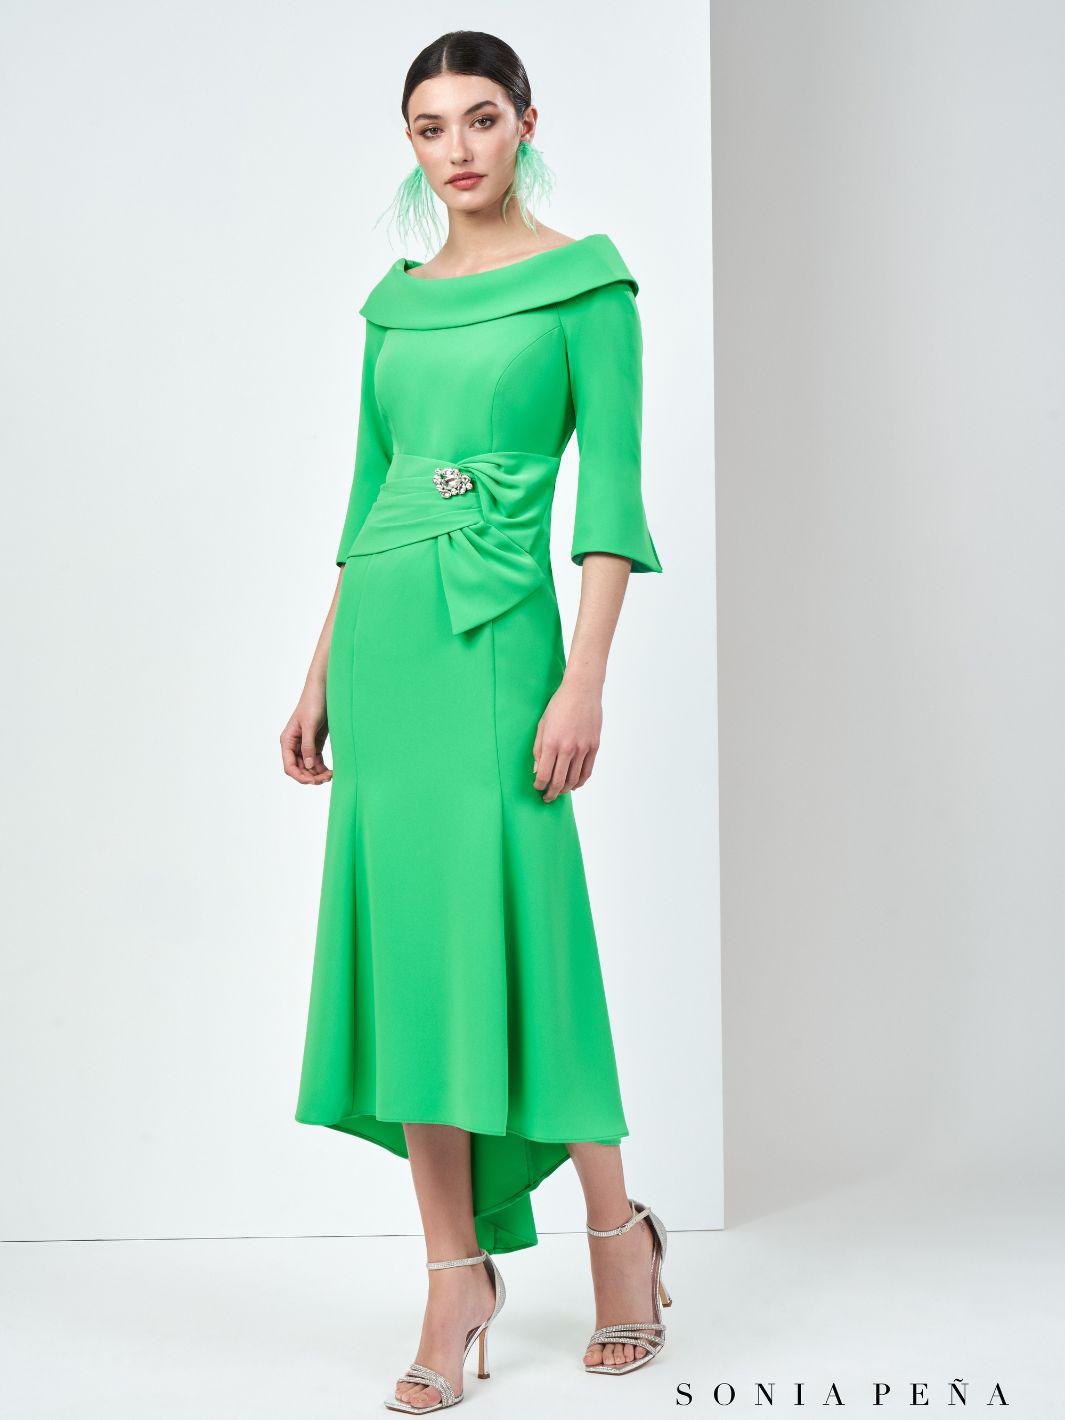 Sonia Pena Dress 11240013A In Green-Mother of the bride- mother of the groom -Nicola Ross